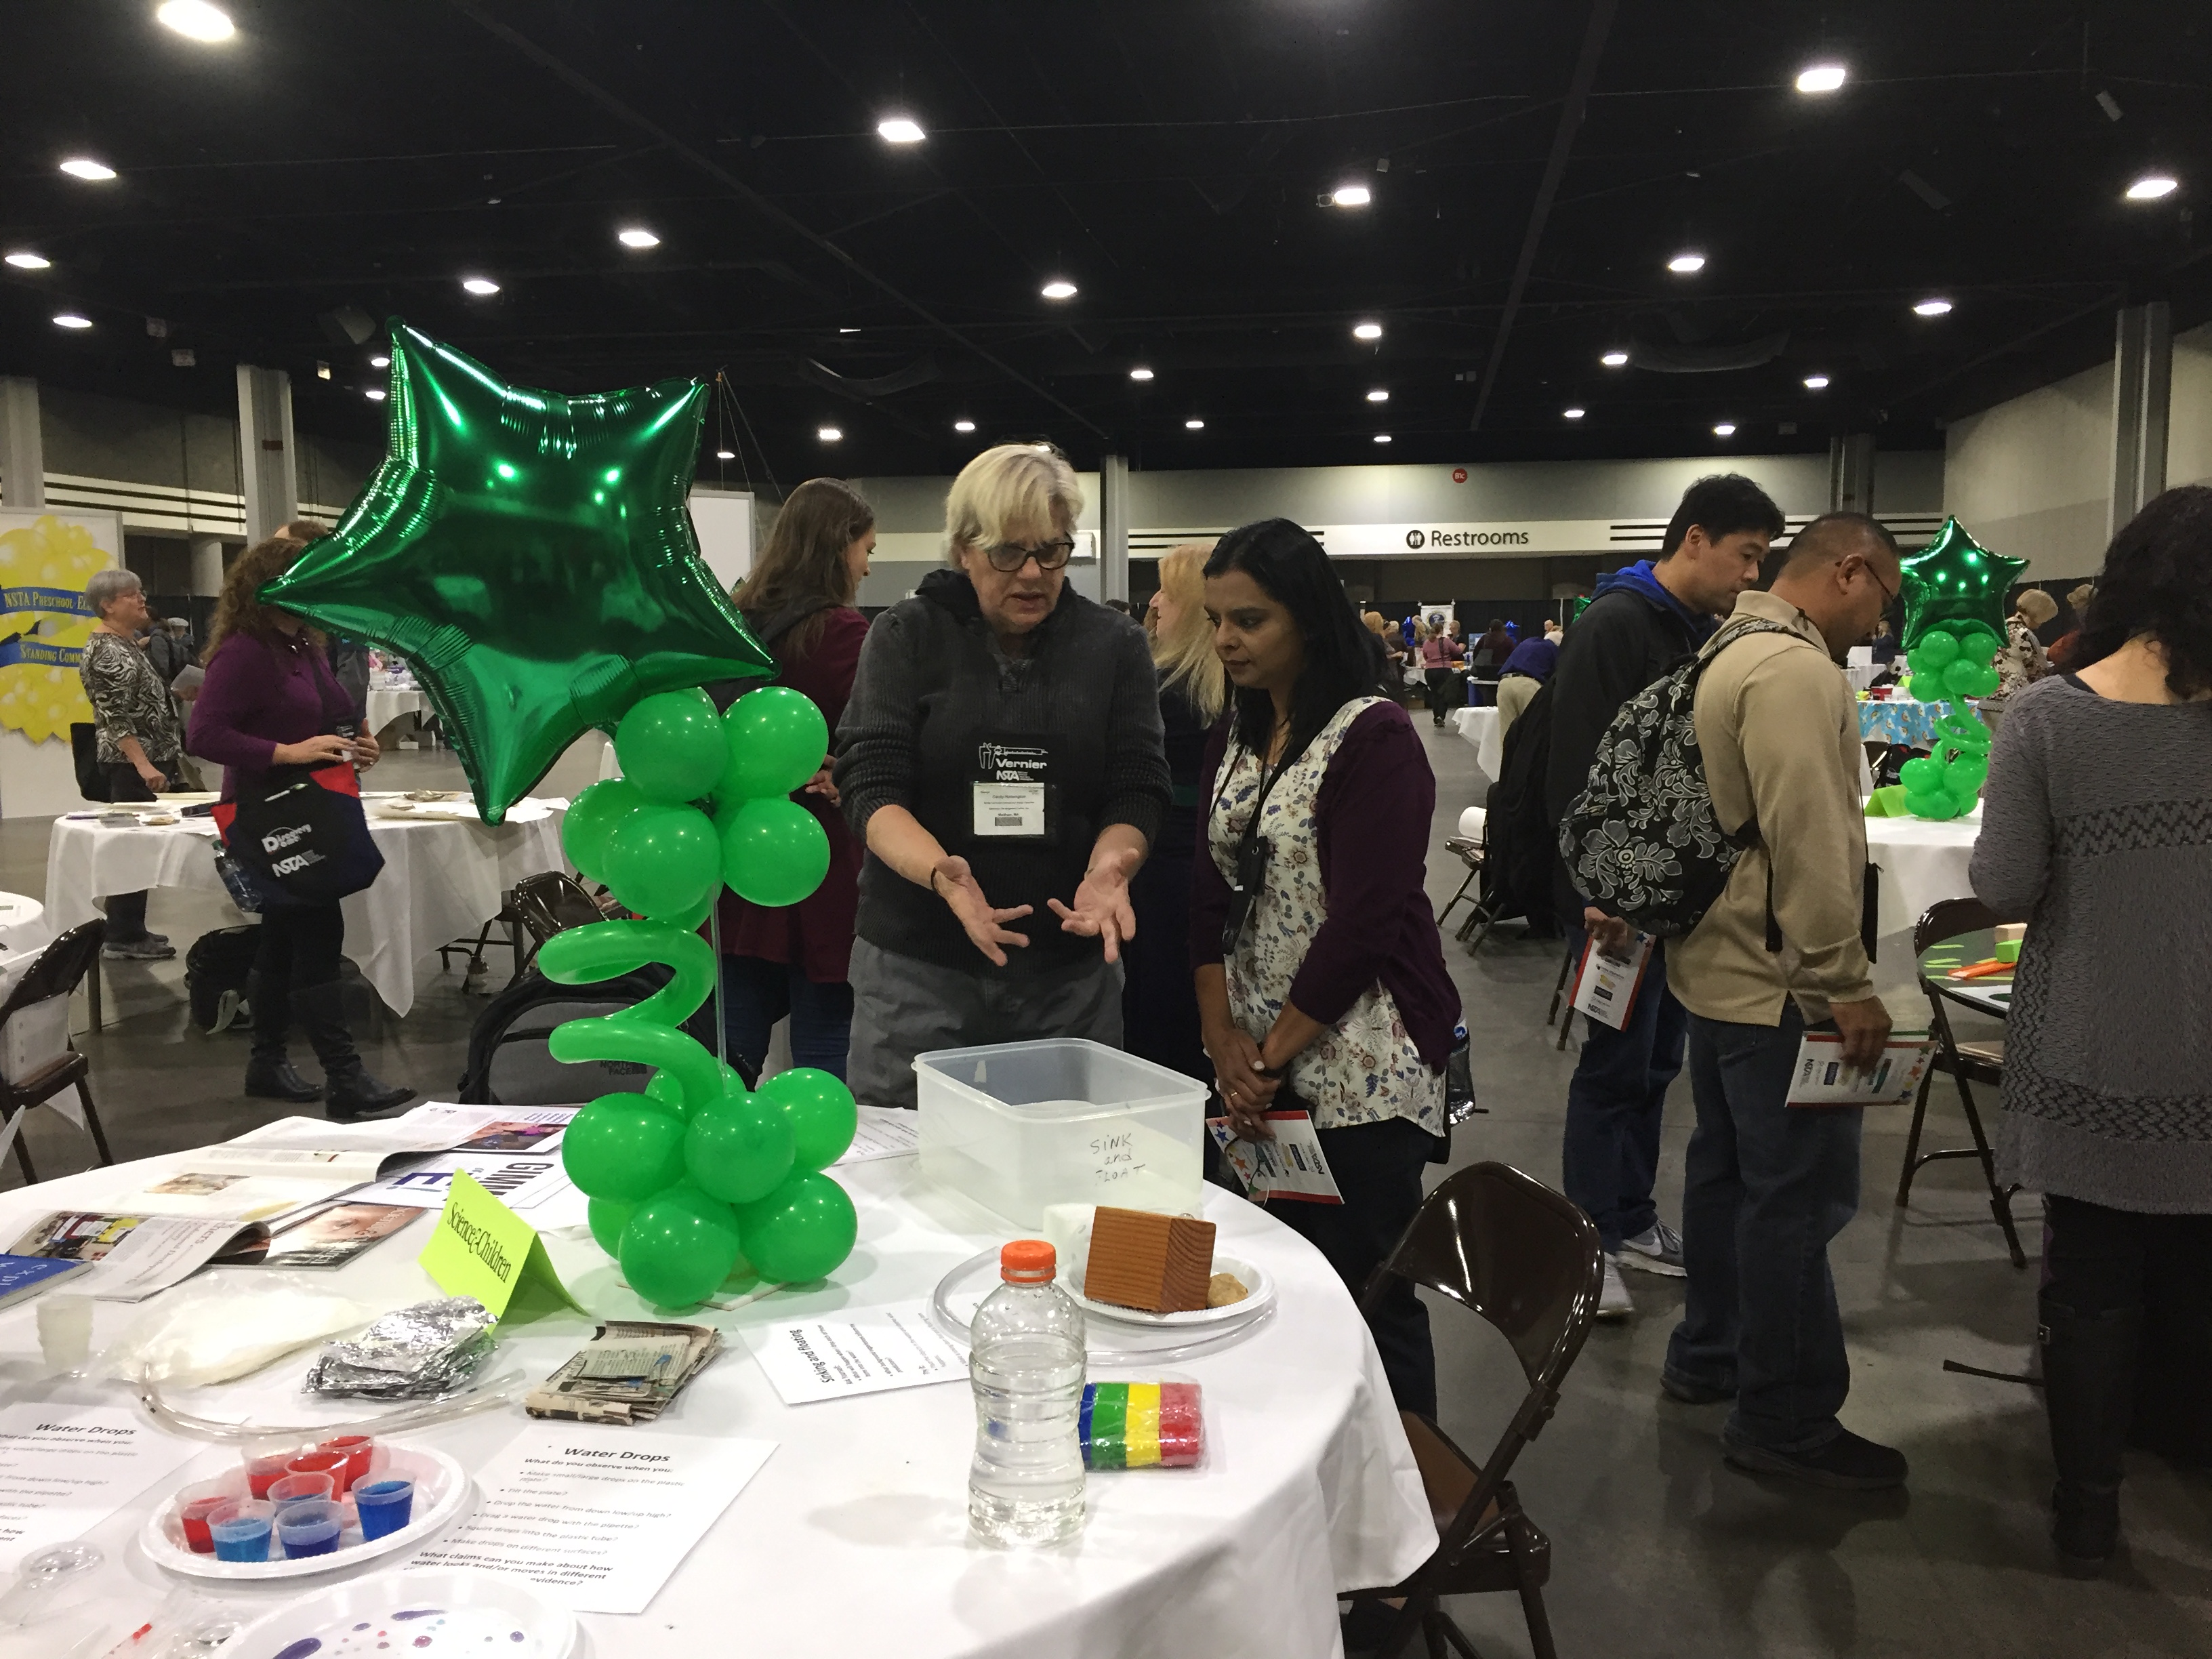 Cindy Hoisington talks with attendees at her table with water activities about early childhood science.